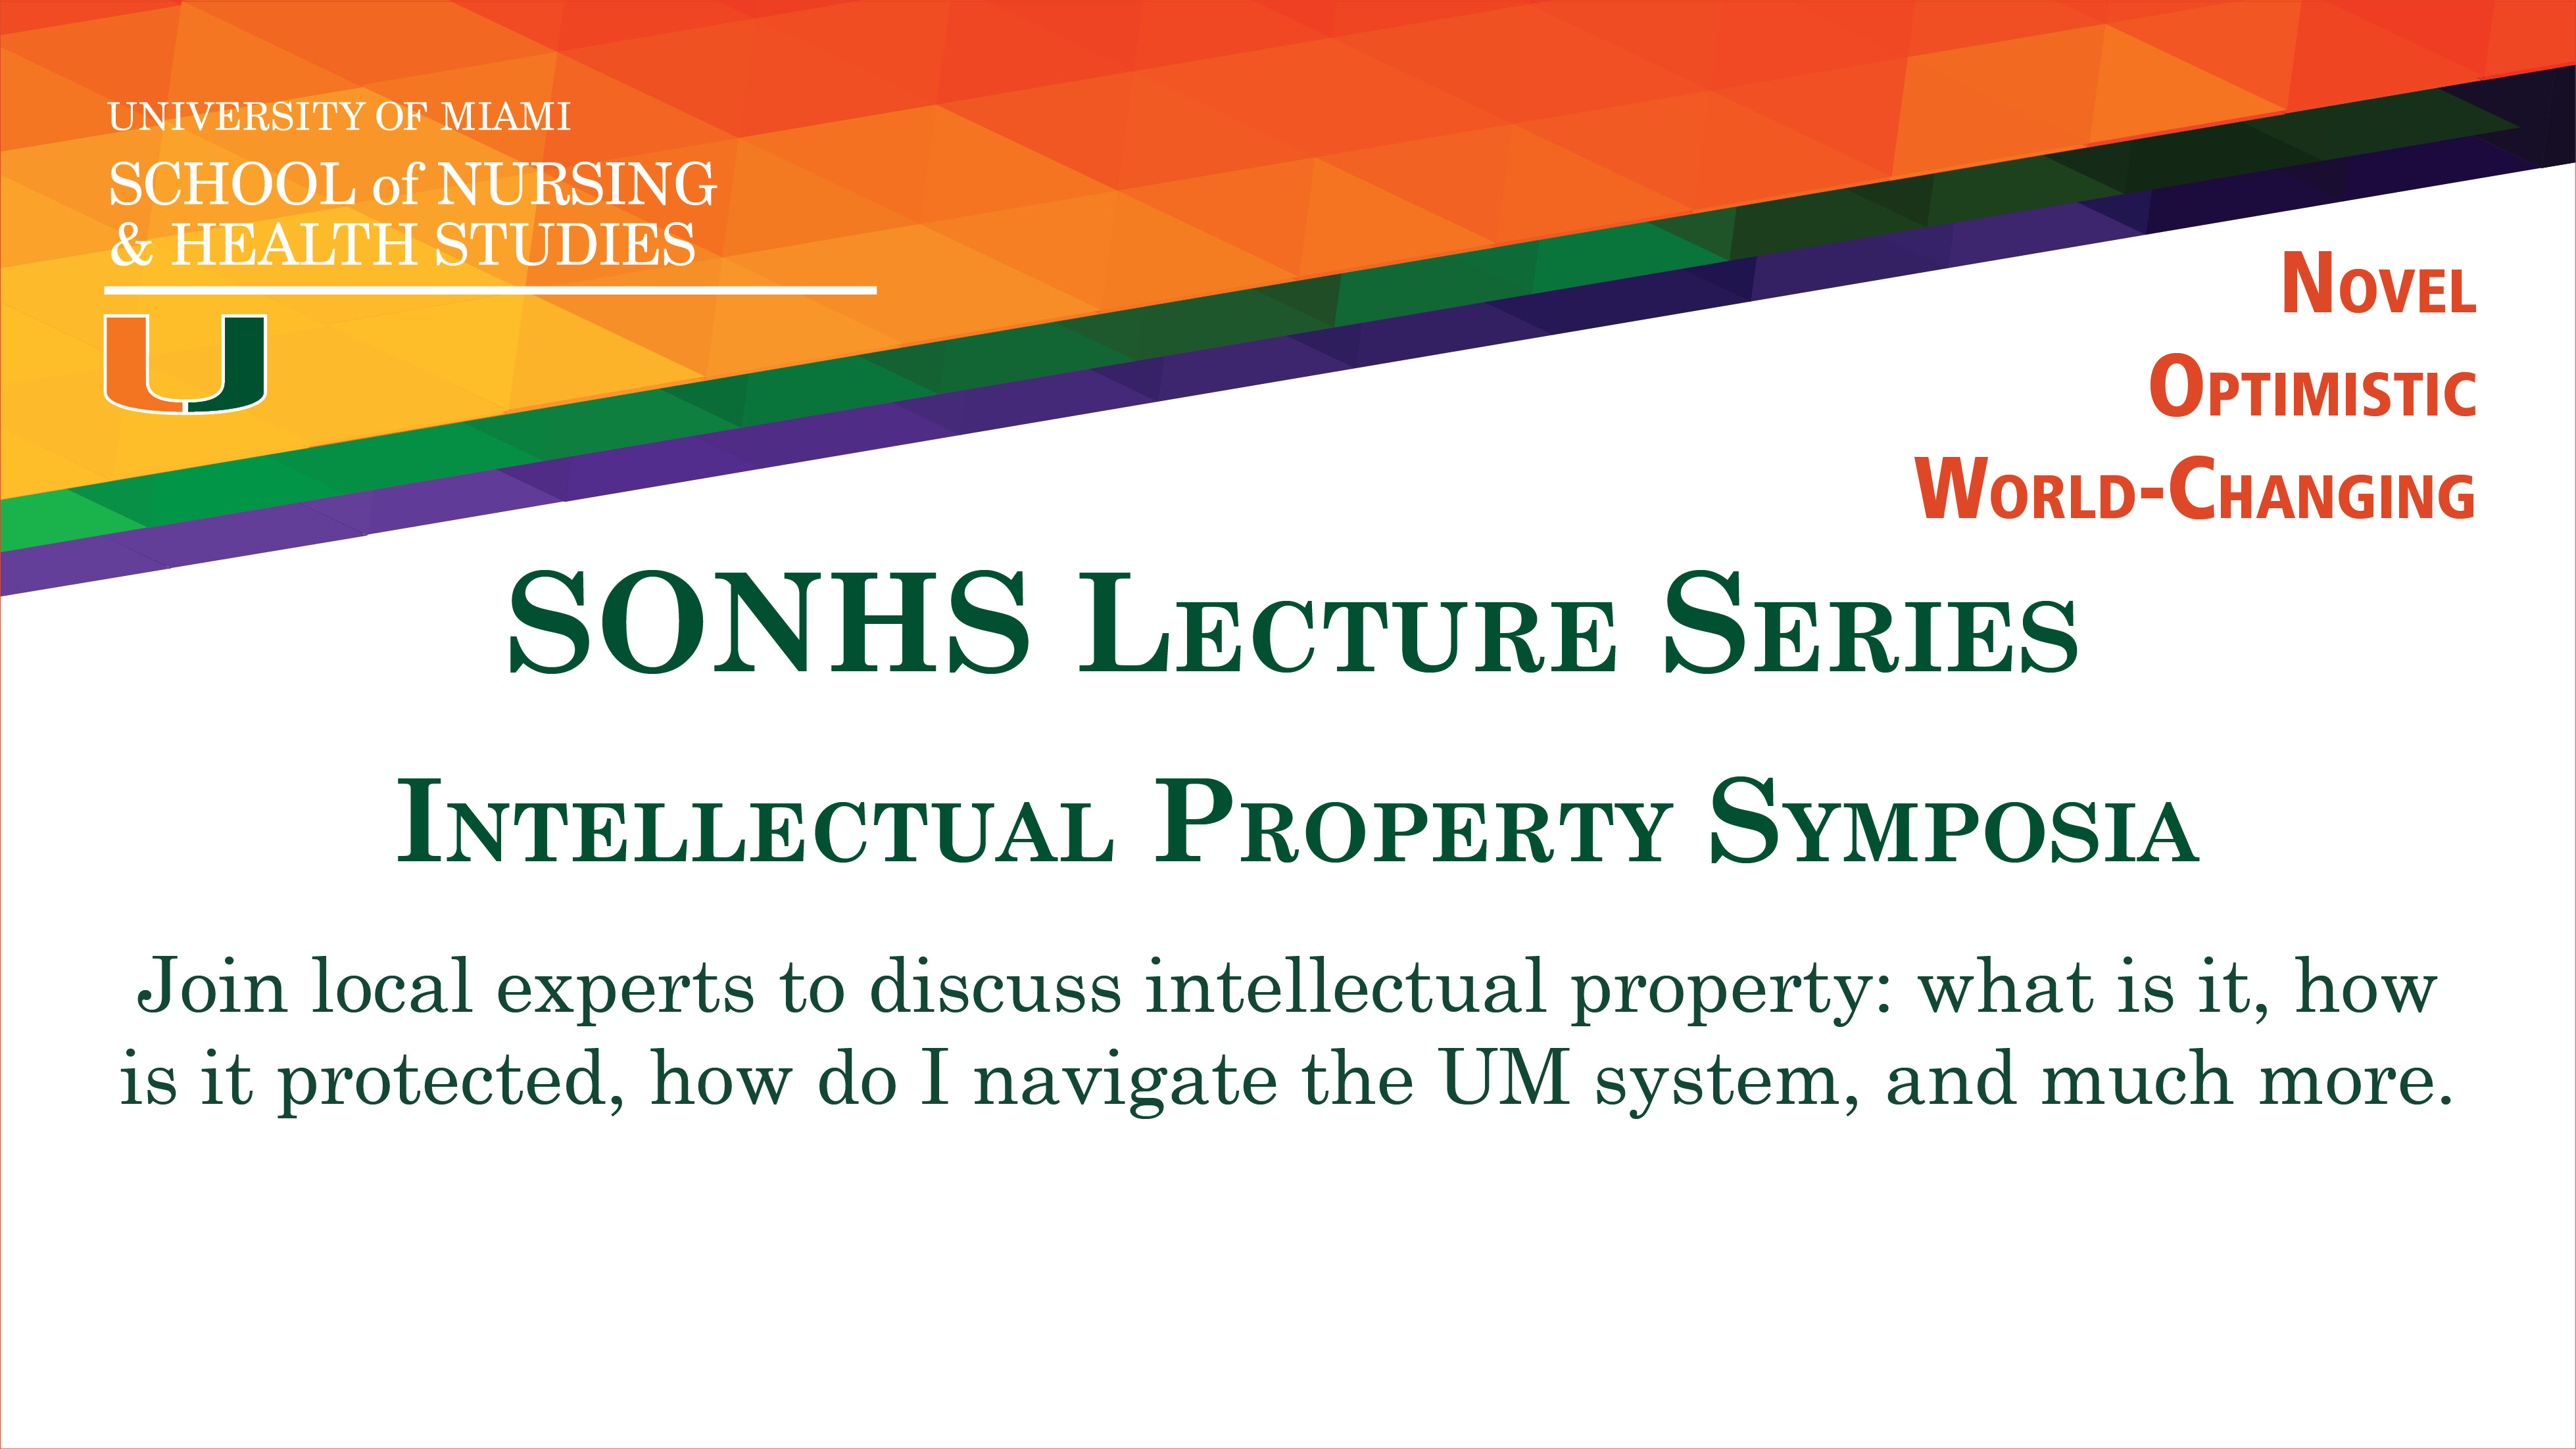 SONHS Lecture Series